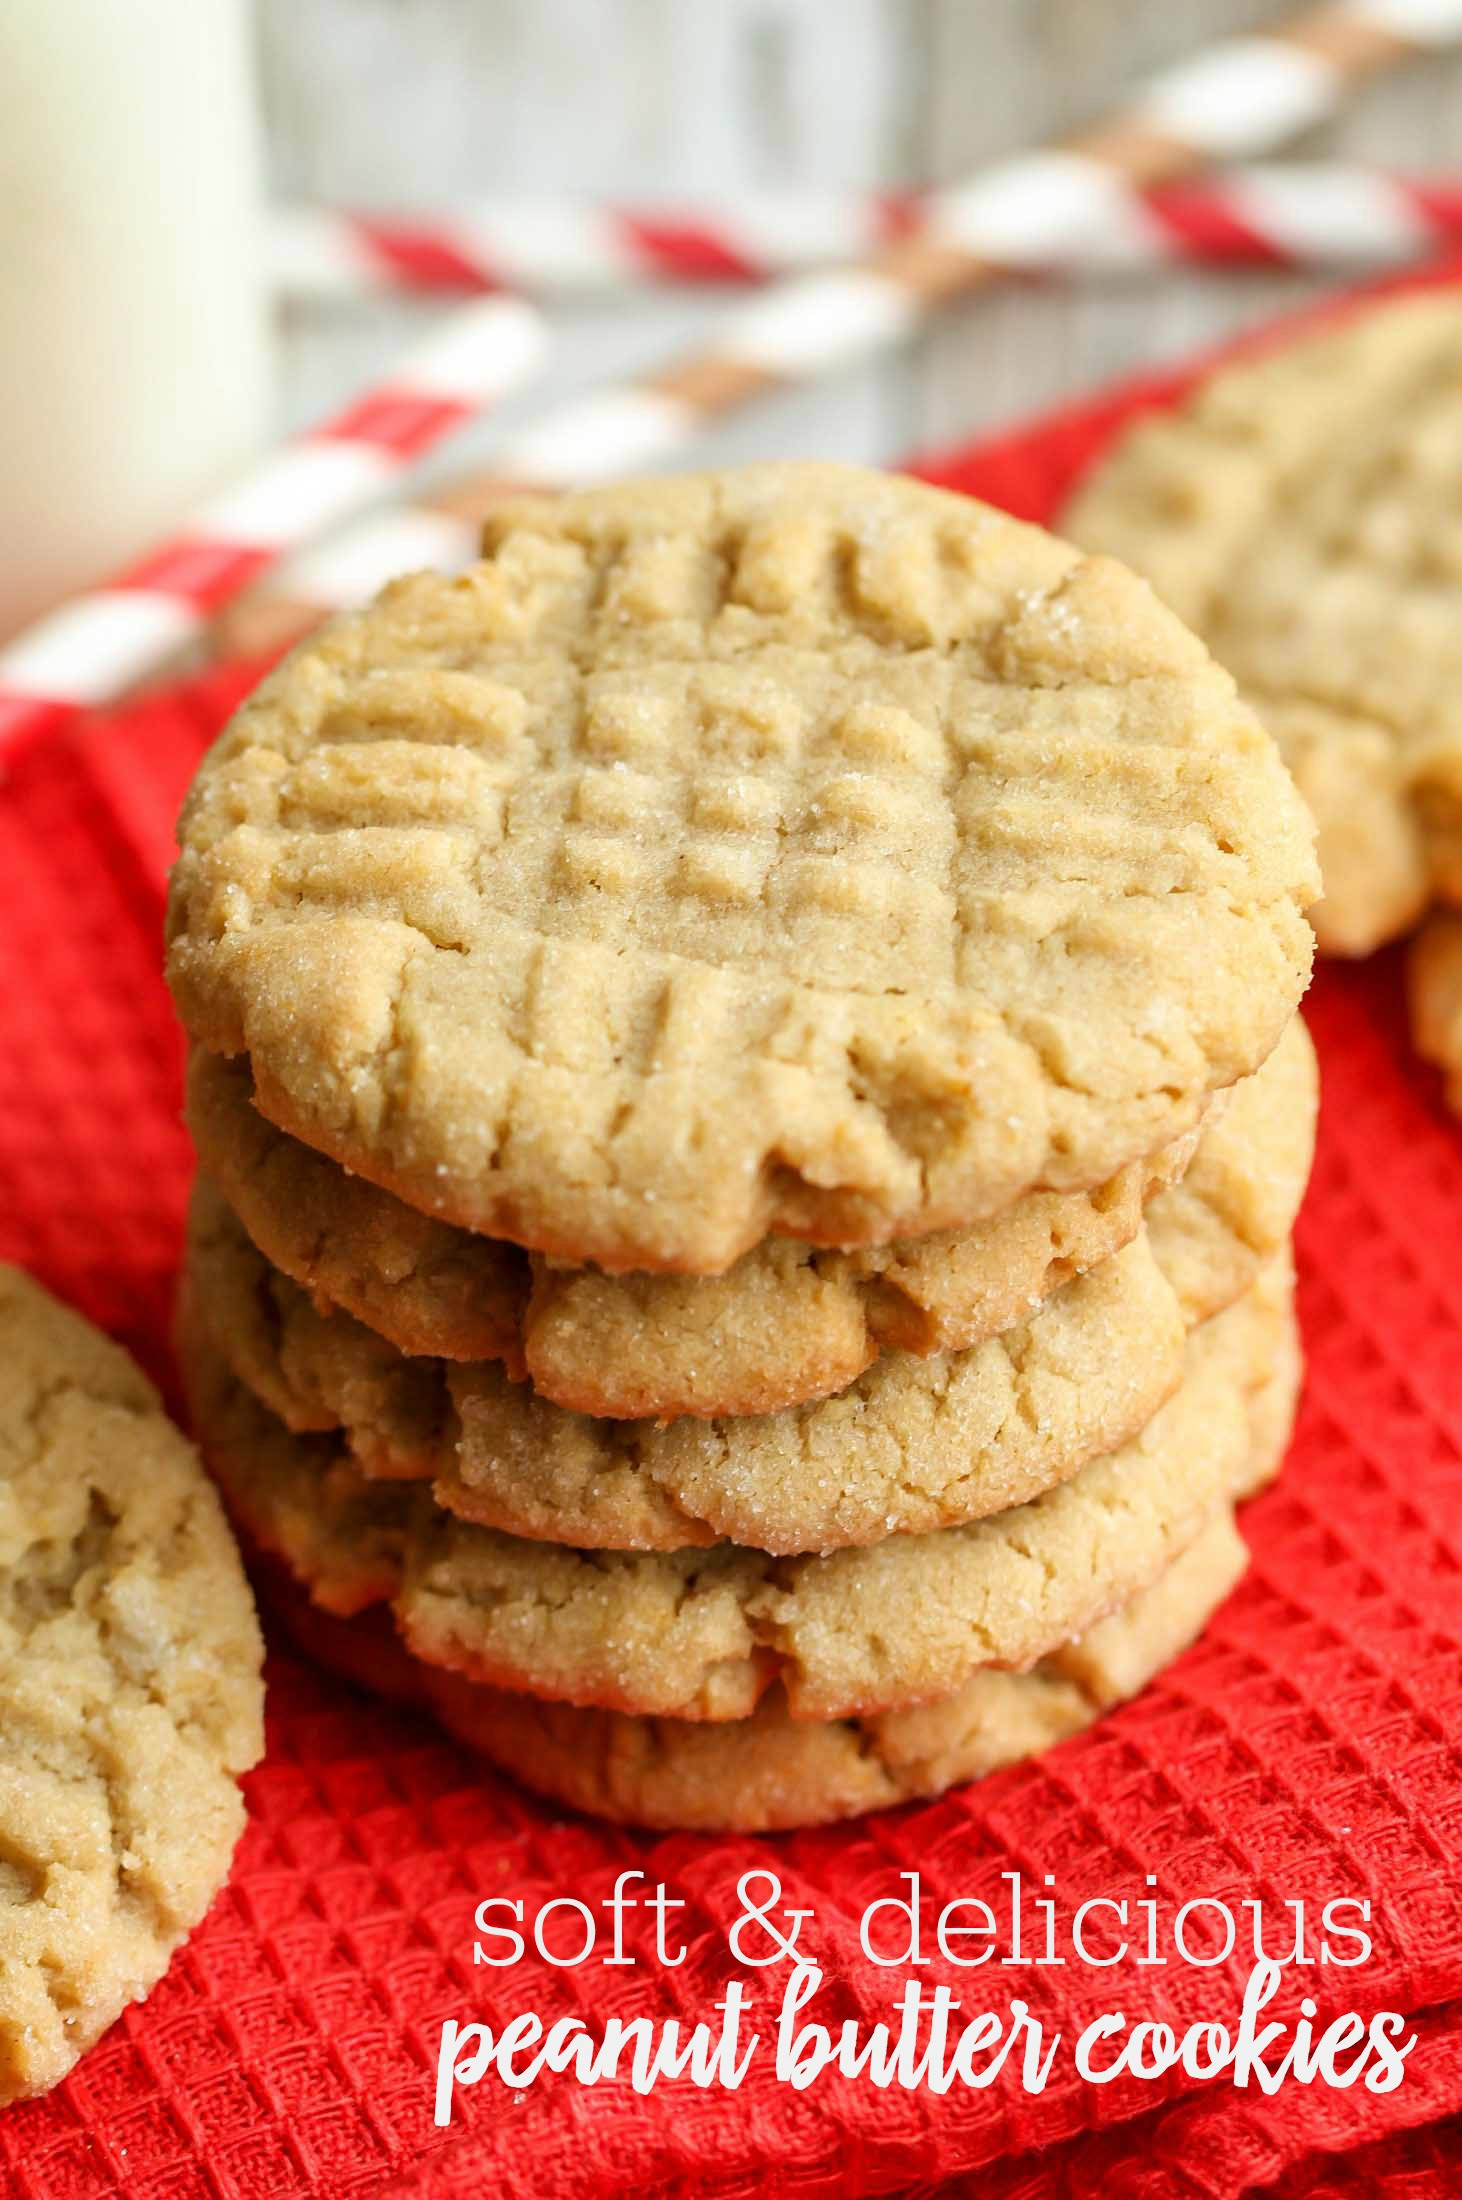 Peanut Butter Cookies Recipe
 EASY & SOFT Peanut Butter Cookies